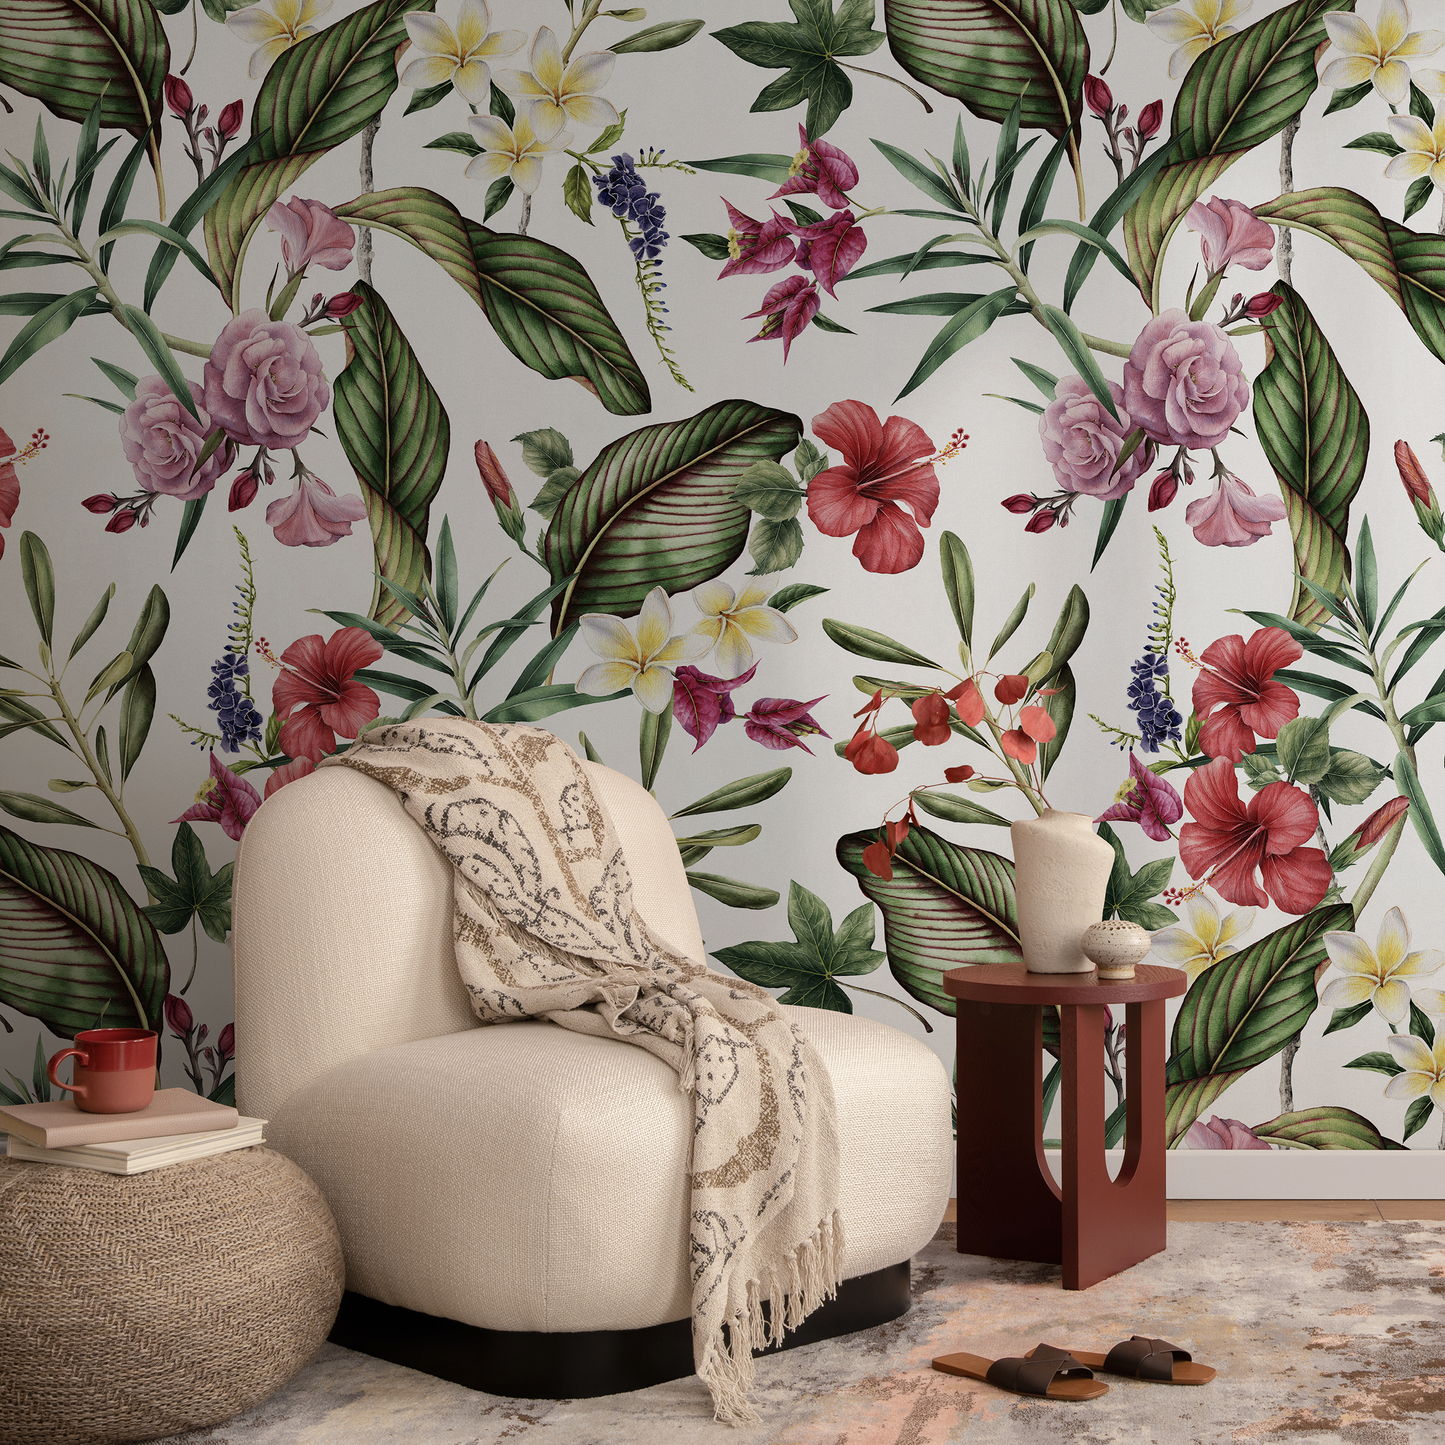 Wallpaper Peel and Stick Wallpaper Removable Wallpaper Home Decor Wall Art Wall Decor Room Decor / Floral Botanical Wallpaper - A203